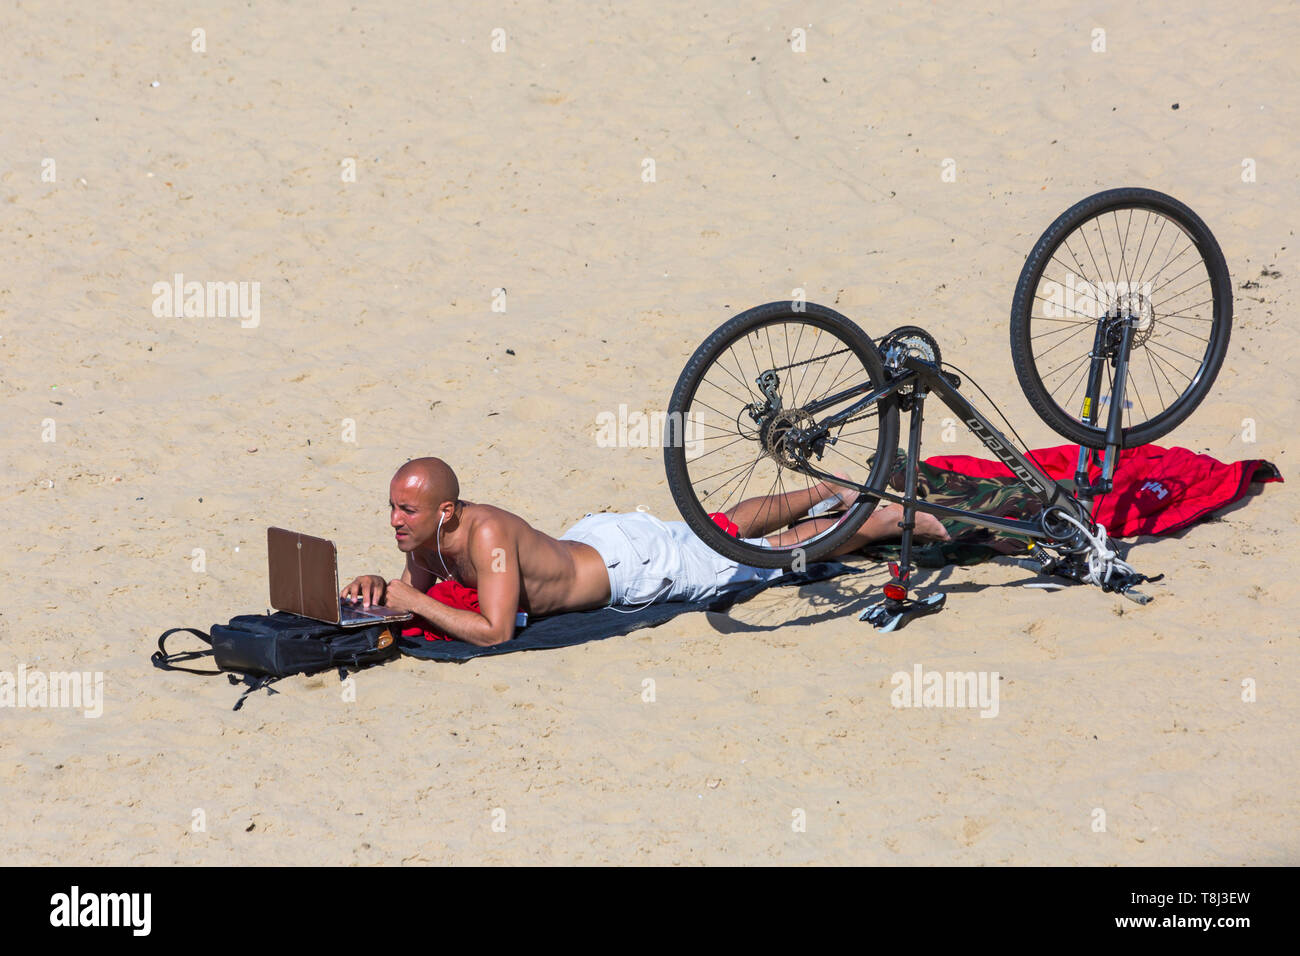 Bournemouth, Dorset, UK. 14th May 2019. UK weather: lovely sunny day, but very blowy at Bournemouth beaches, as visitors head to the seaside to make the most of the sunshine.  Man with laptop and bike on the beach.  Credit: Carolyn Jenkins/Alamy Live News Stock Photo